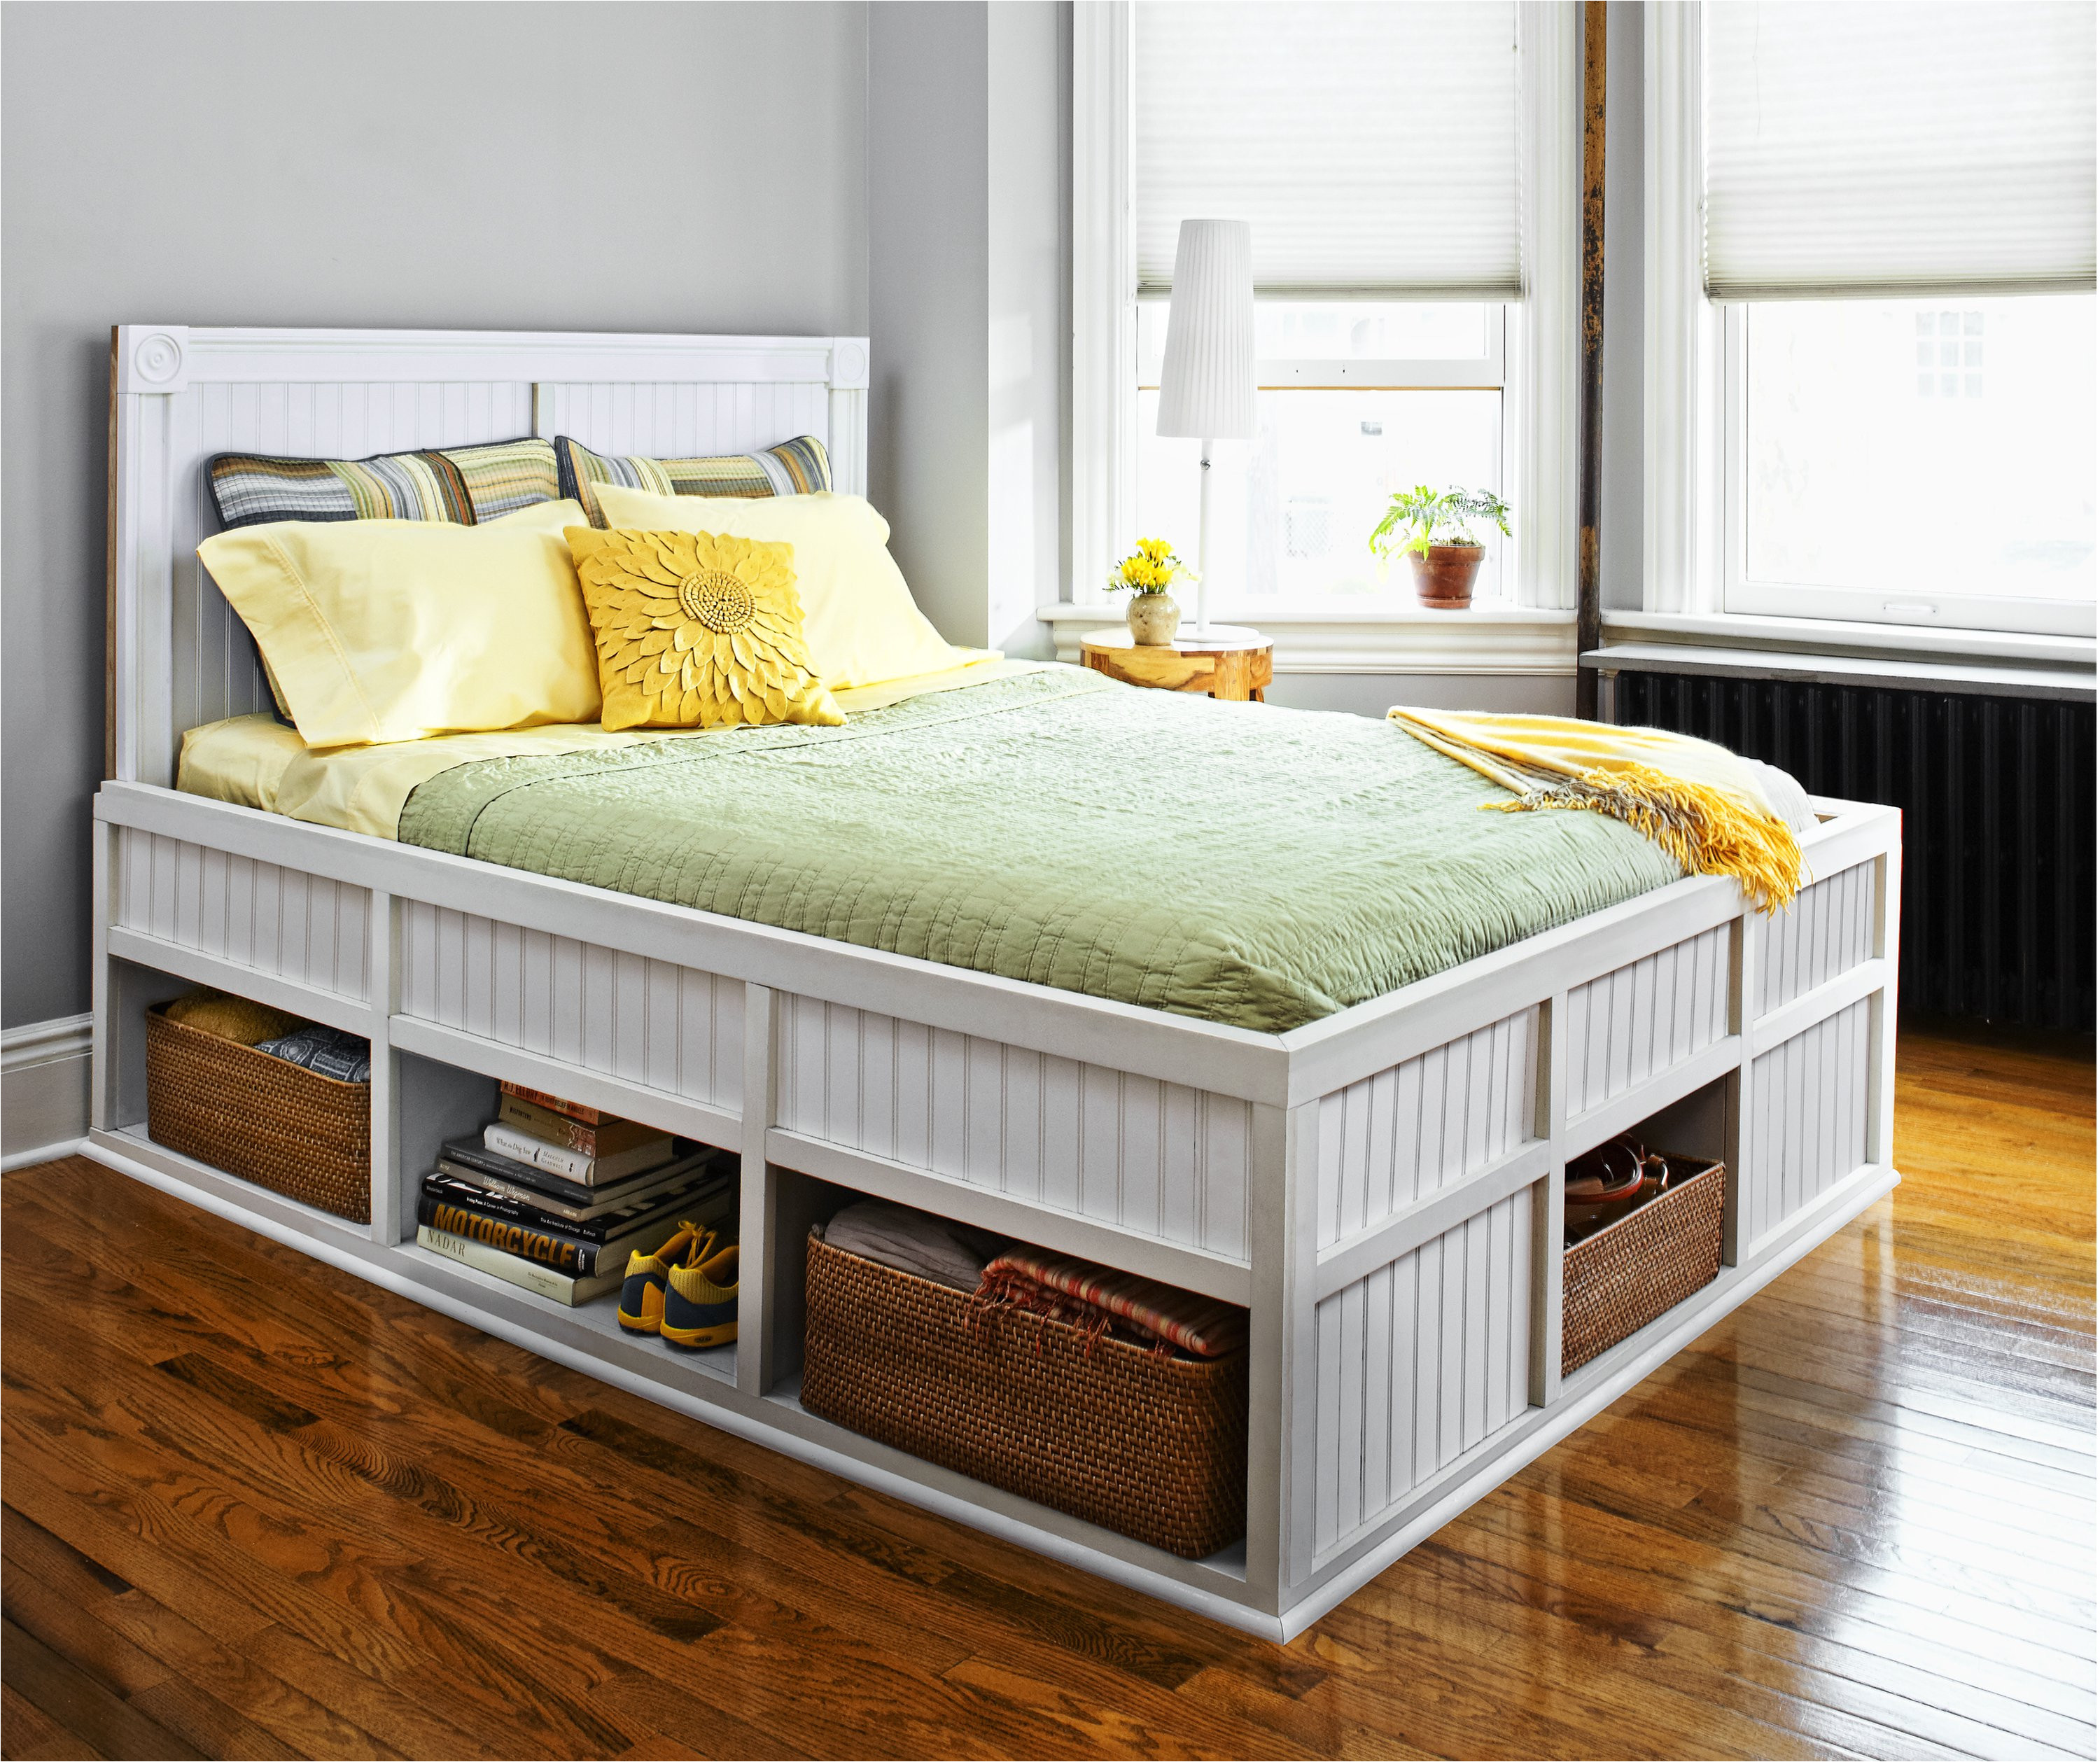 how to make a queen size bed frame with storage ideas